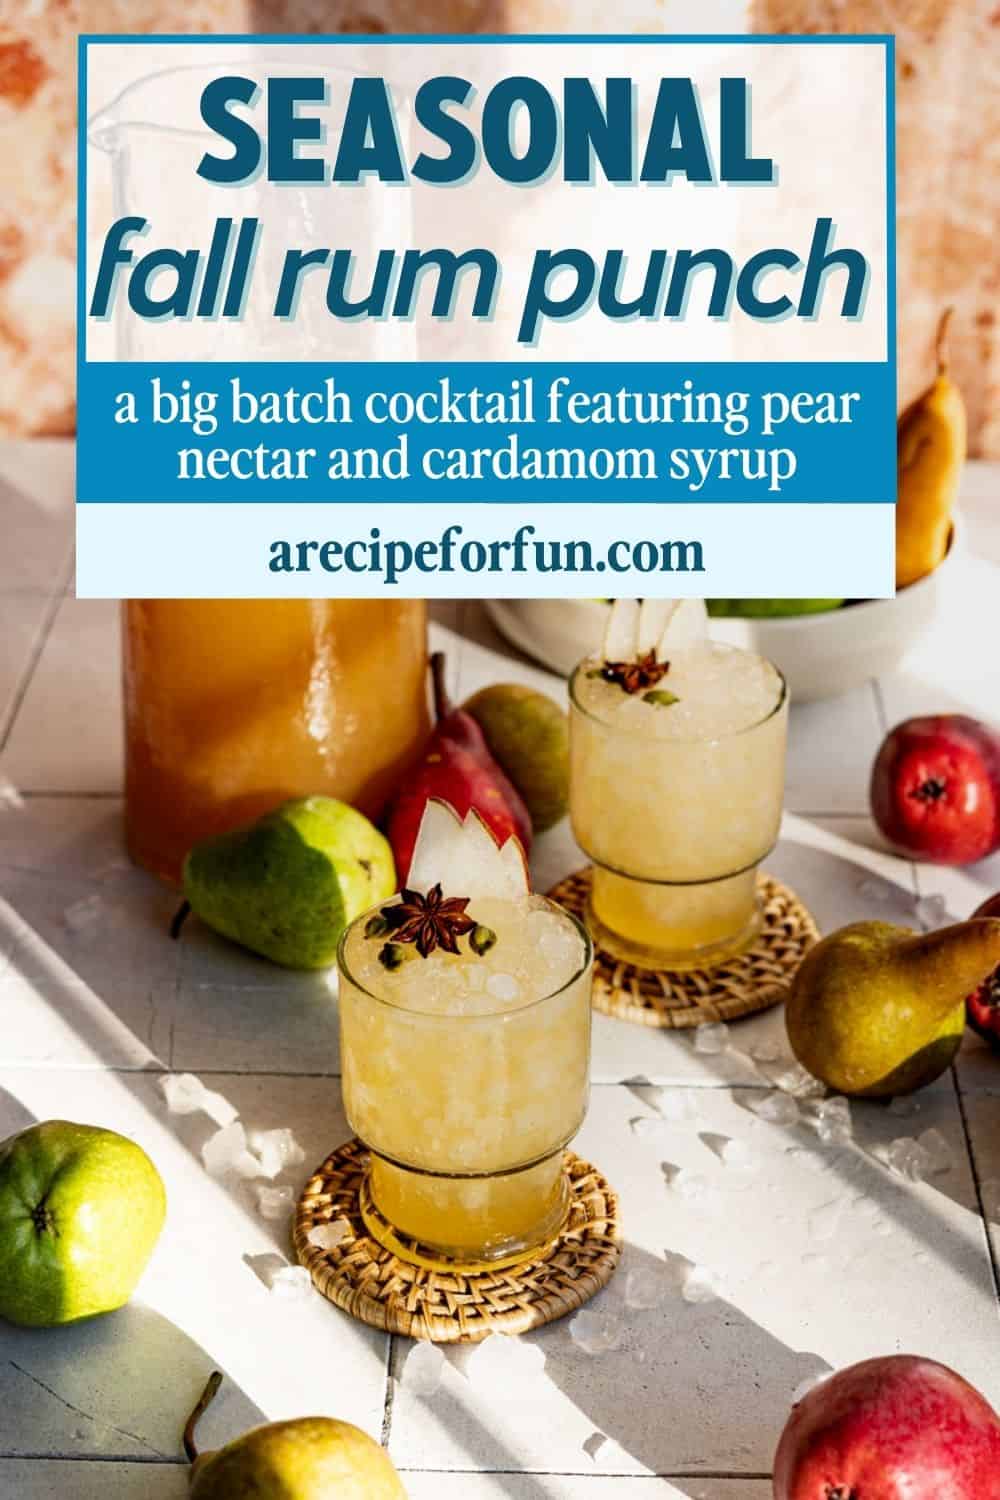 Pinterest Pin for a post about a recipe for a fall rum punch batch cocktail.